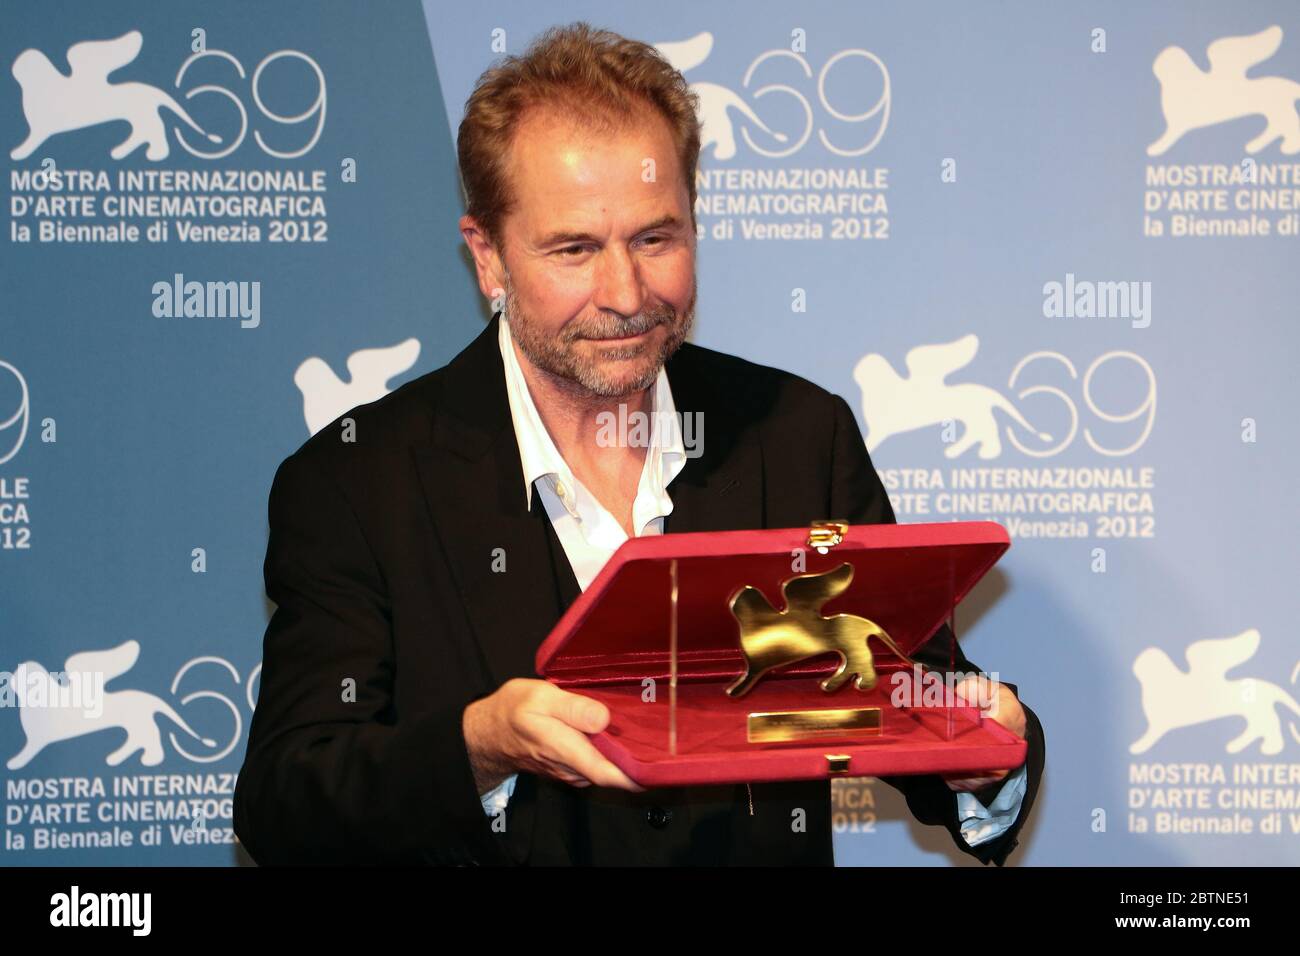 VENICE, ITALY - SEPTEMBER 08: Ulrich Seidl holds the Special Jury Prize for 'Paradies' at the Award Winners Photocall Stock Photo